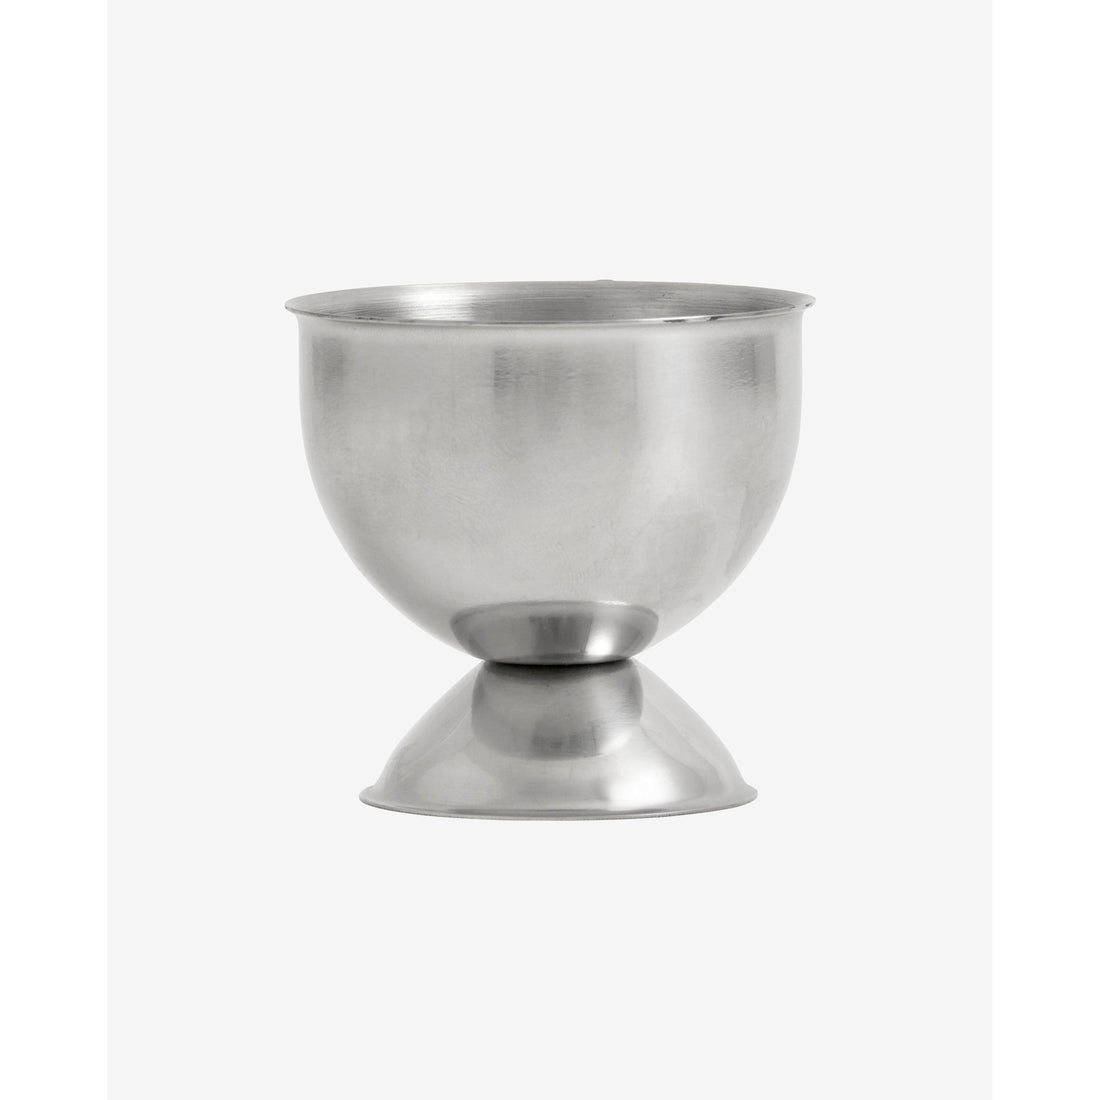 Stainless steel egg cup - gray/silver